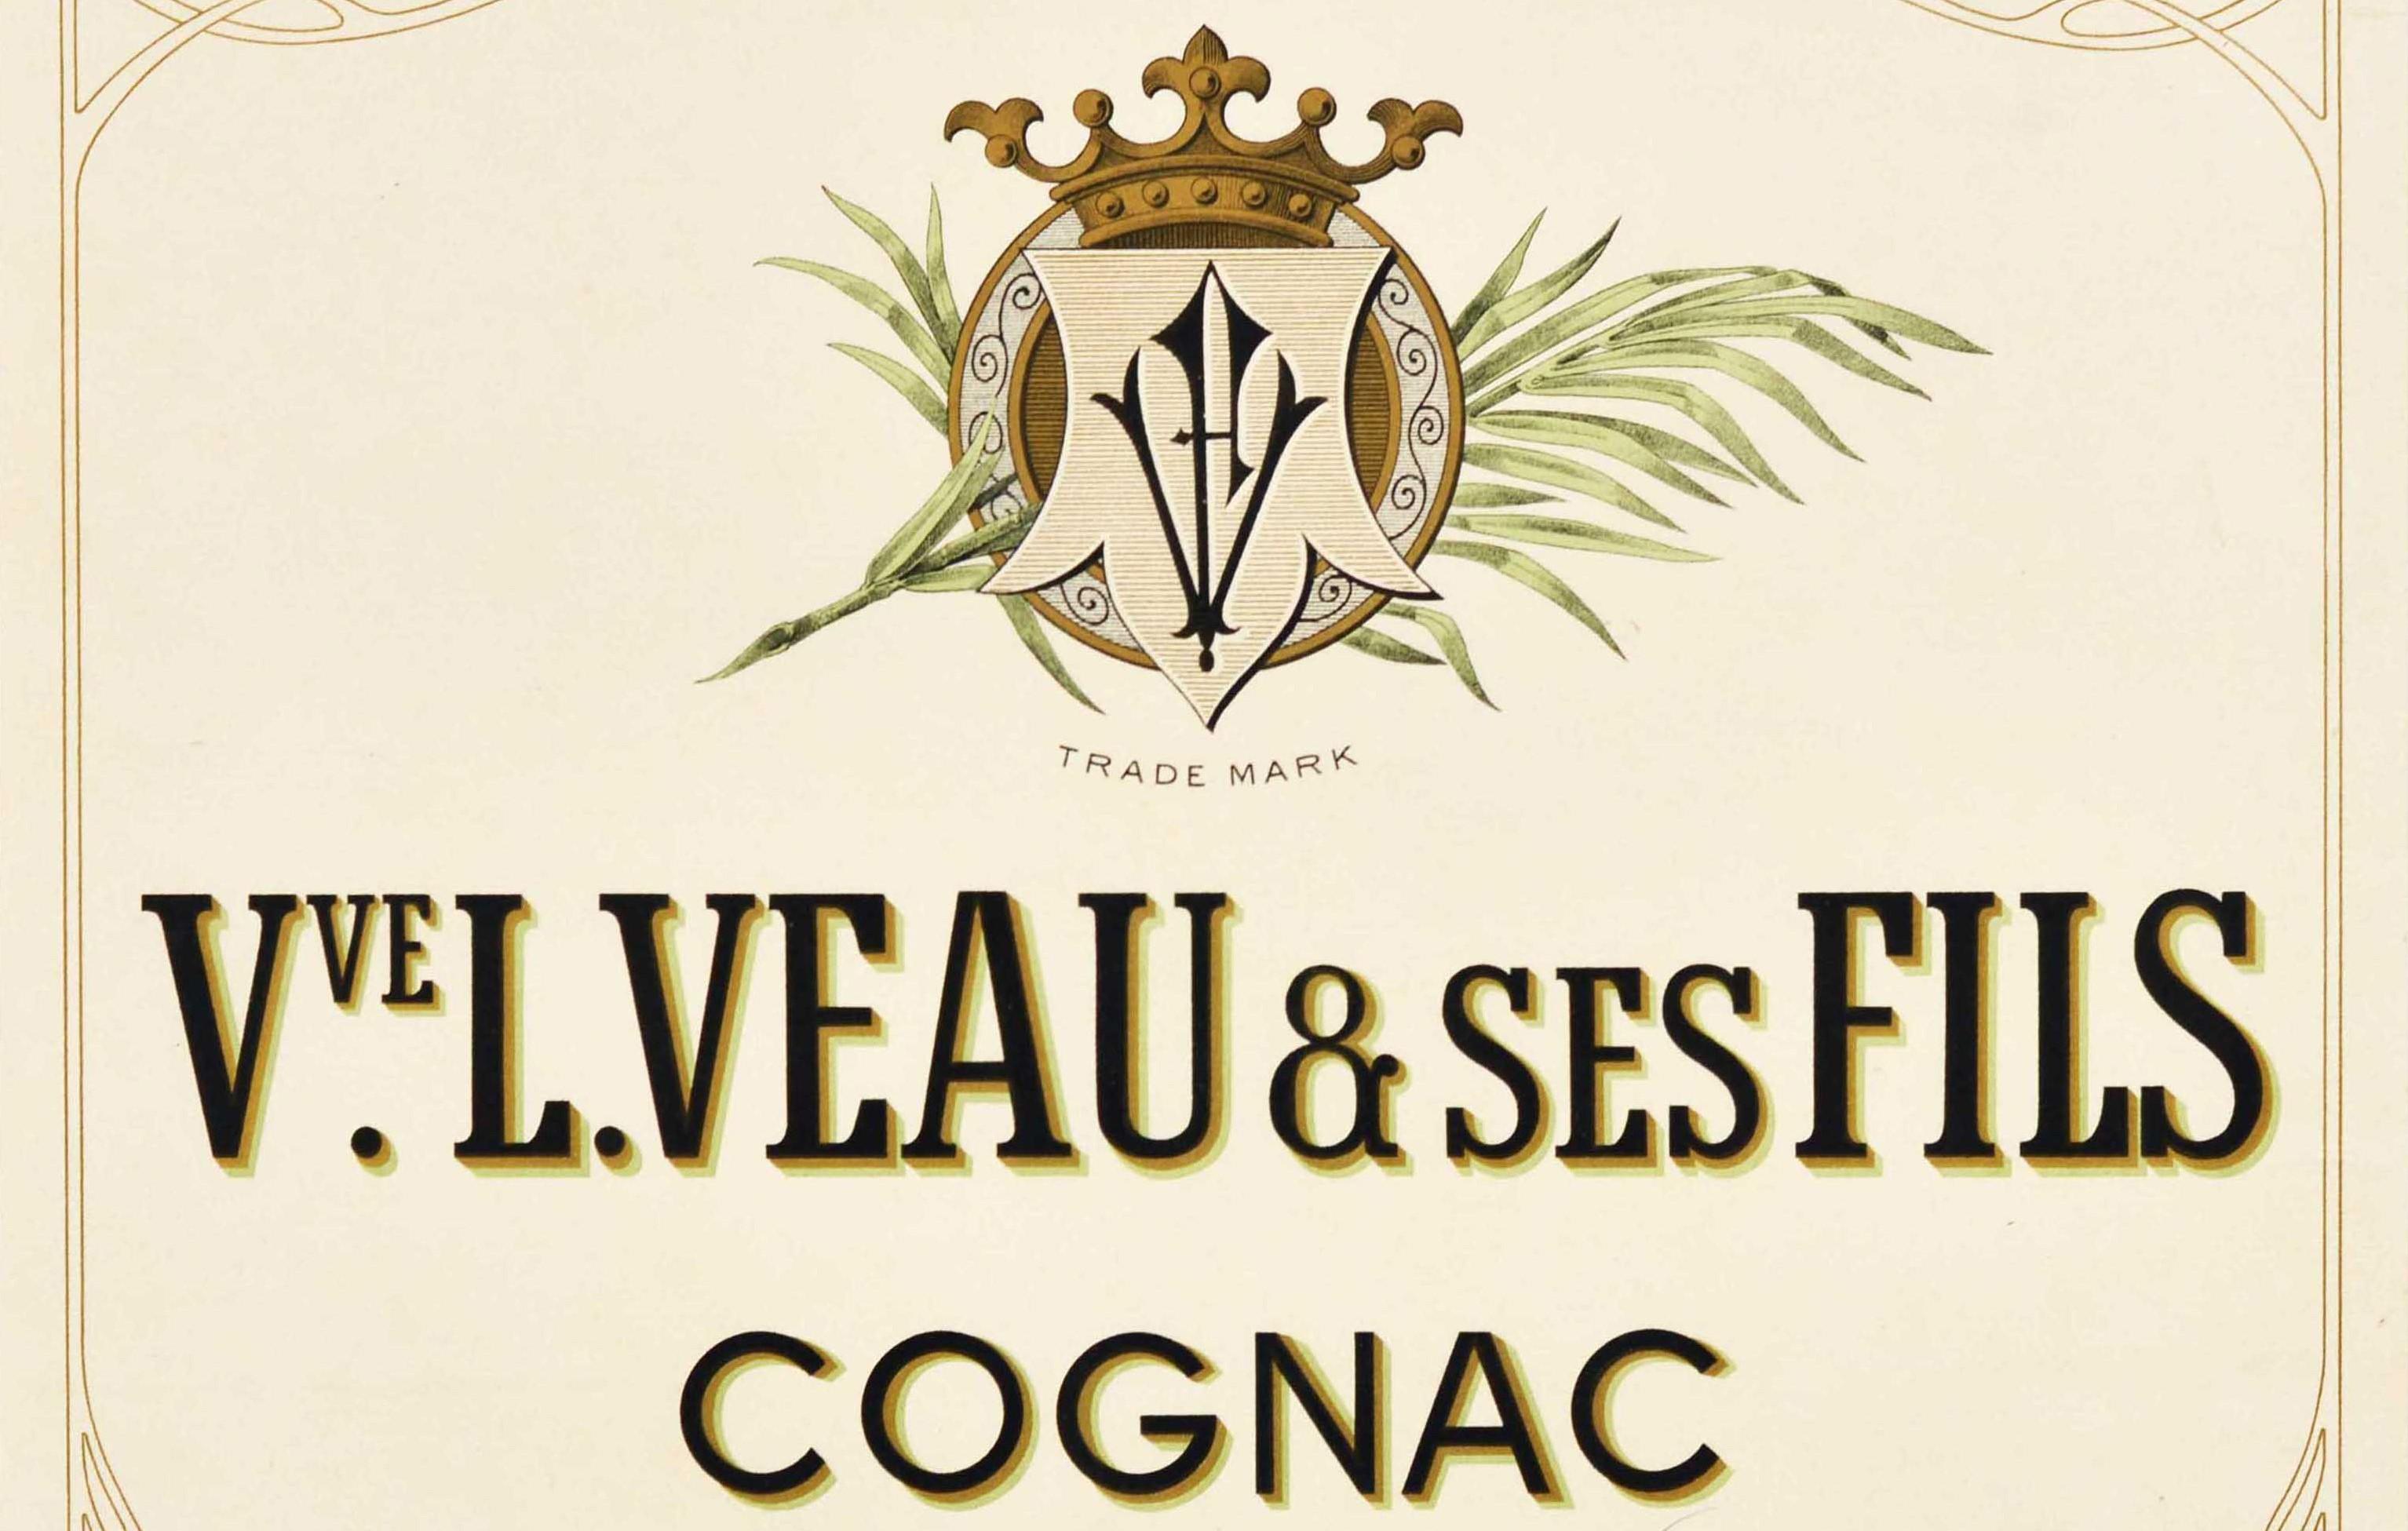 Original antique alcohol drink advertising poster for Veuve L. Veau & Ses Fils Cognac featuring the bold stylised lettering below a trademark logo of intertwined letters in front of a green branch and crown at the top of the decorative circle.